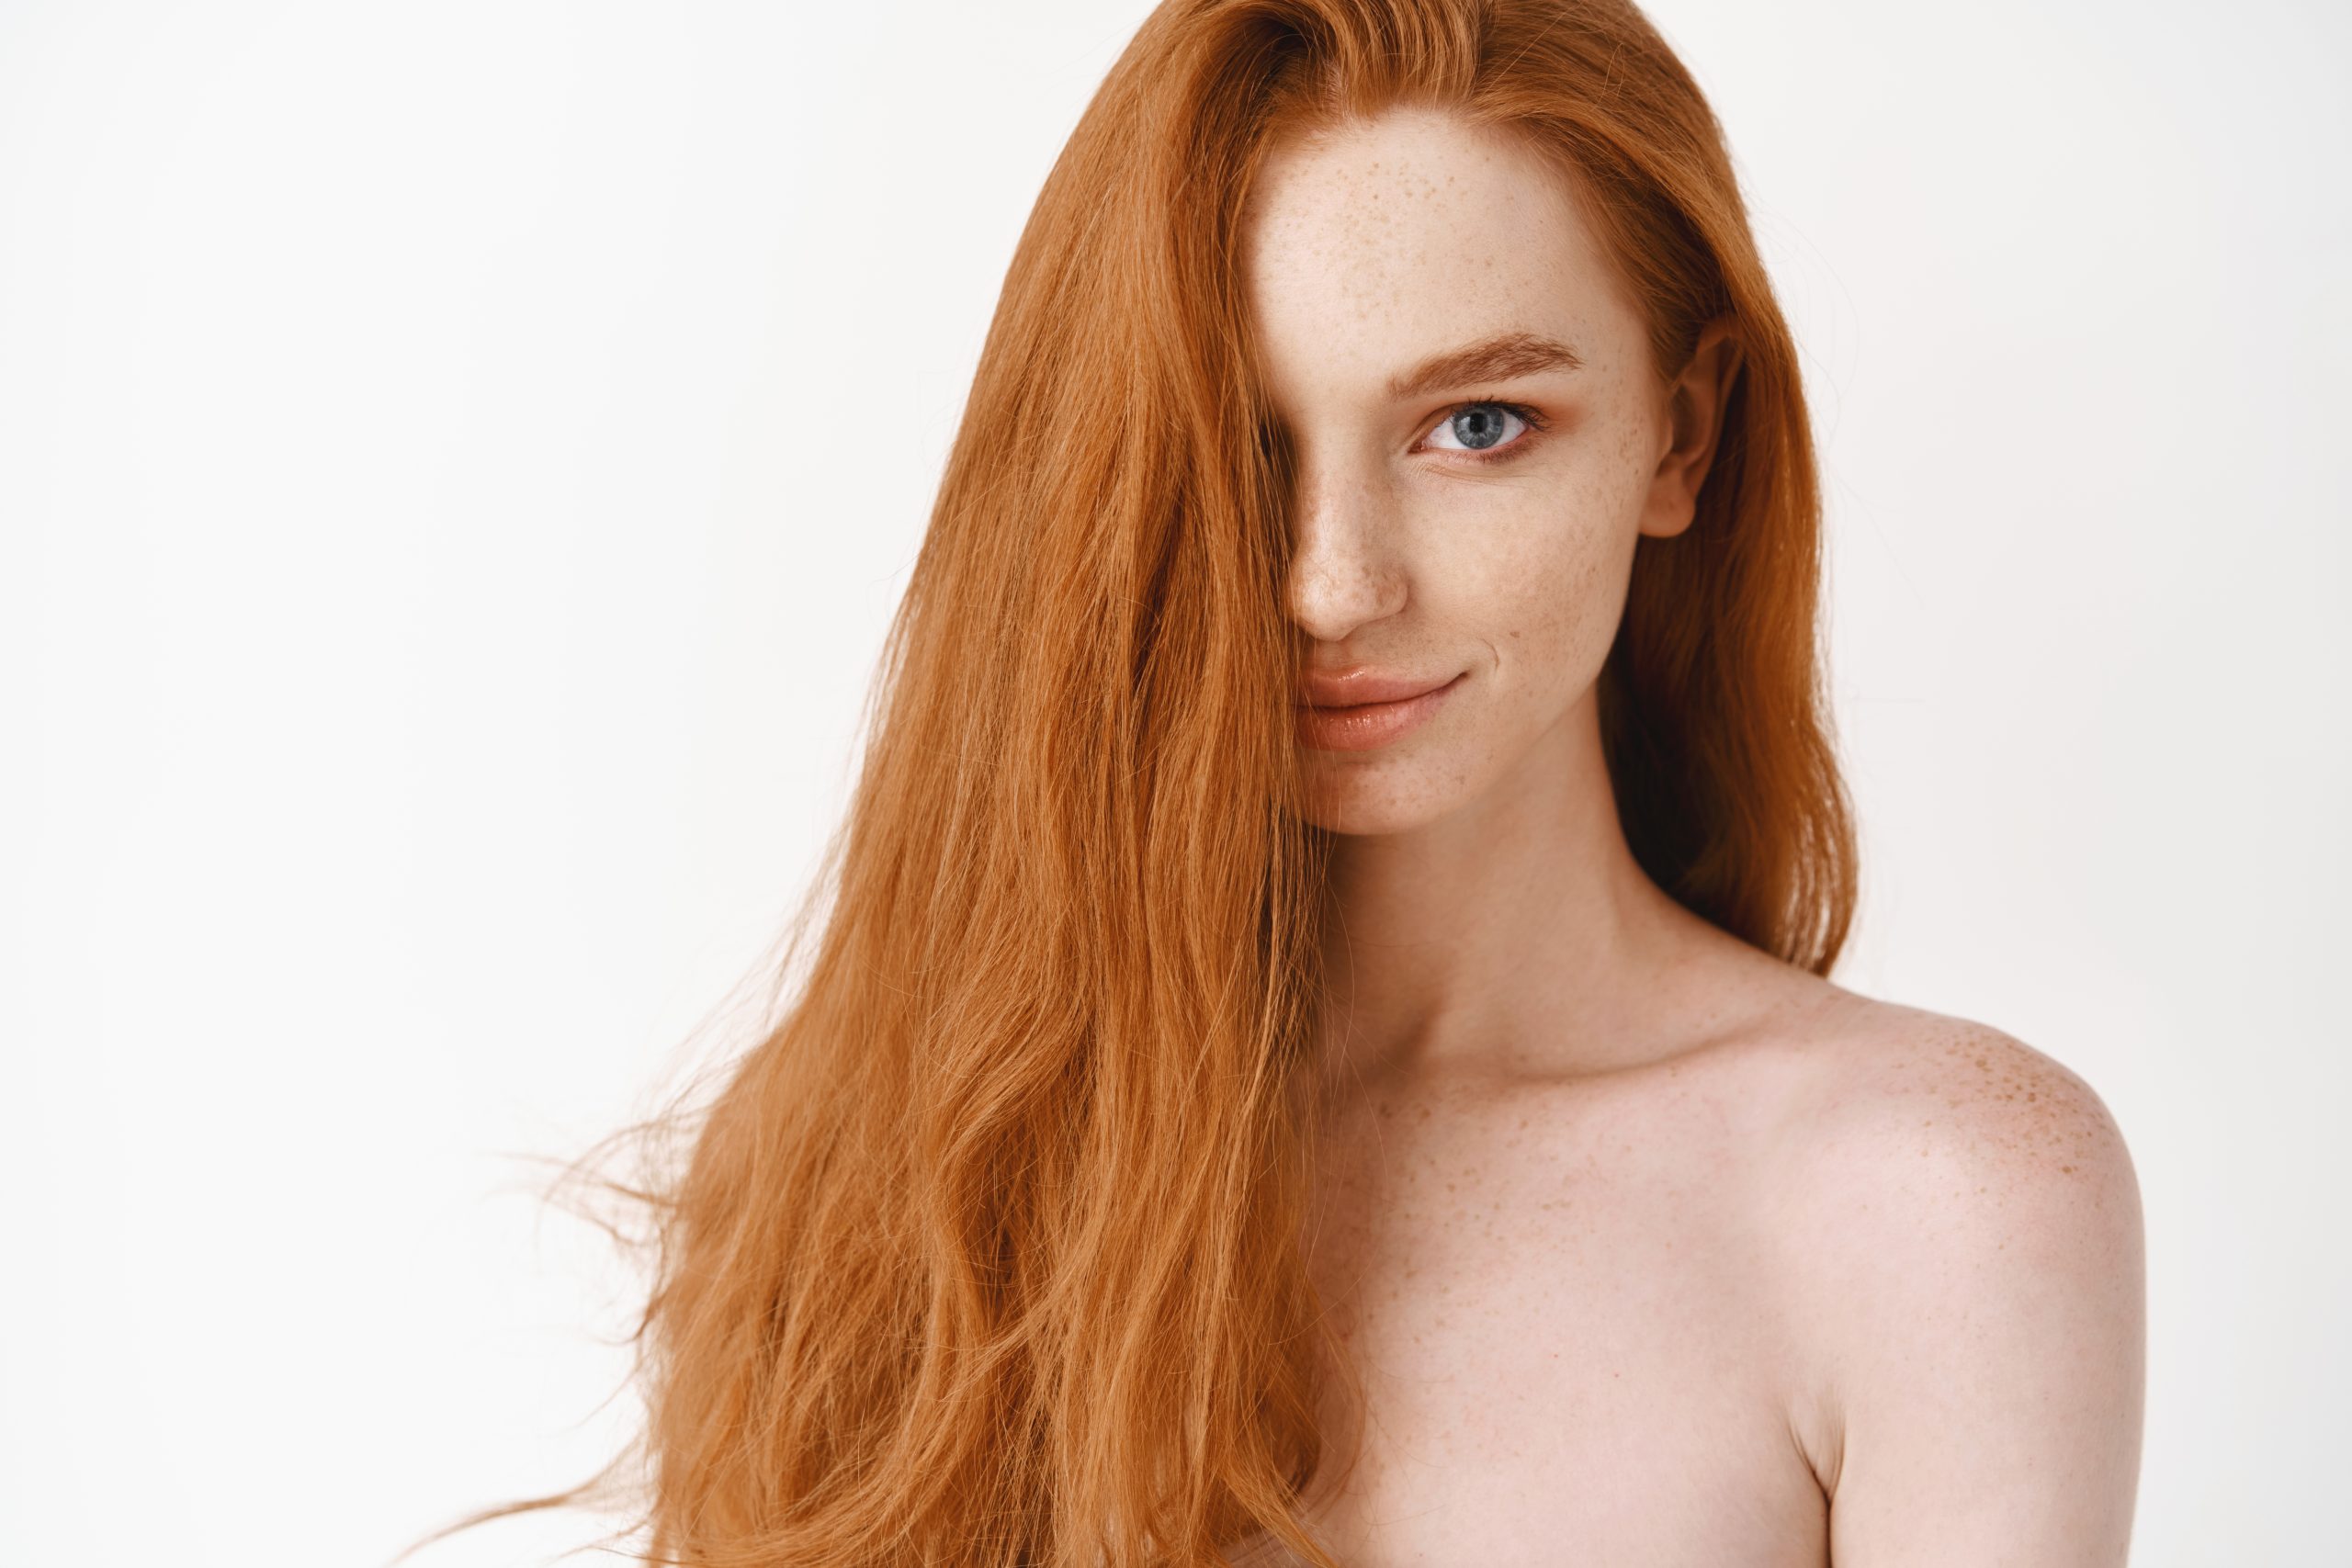 Beautiful young woman with long perfect red hair and blue eyes looking at  camera, standing naked, showing pale clean skin and natural haircut, white  background -